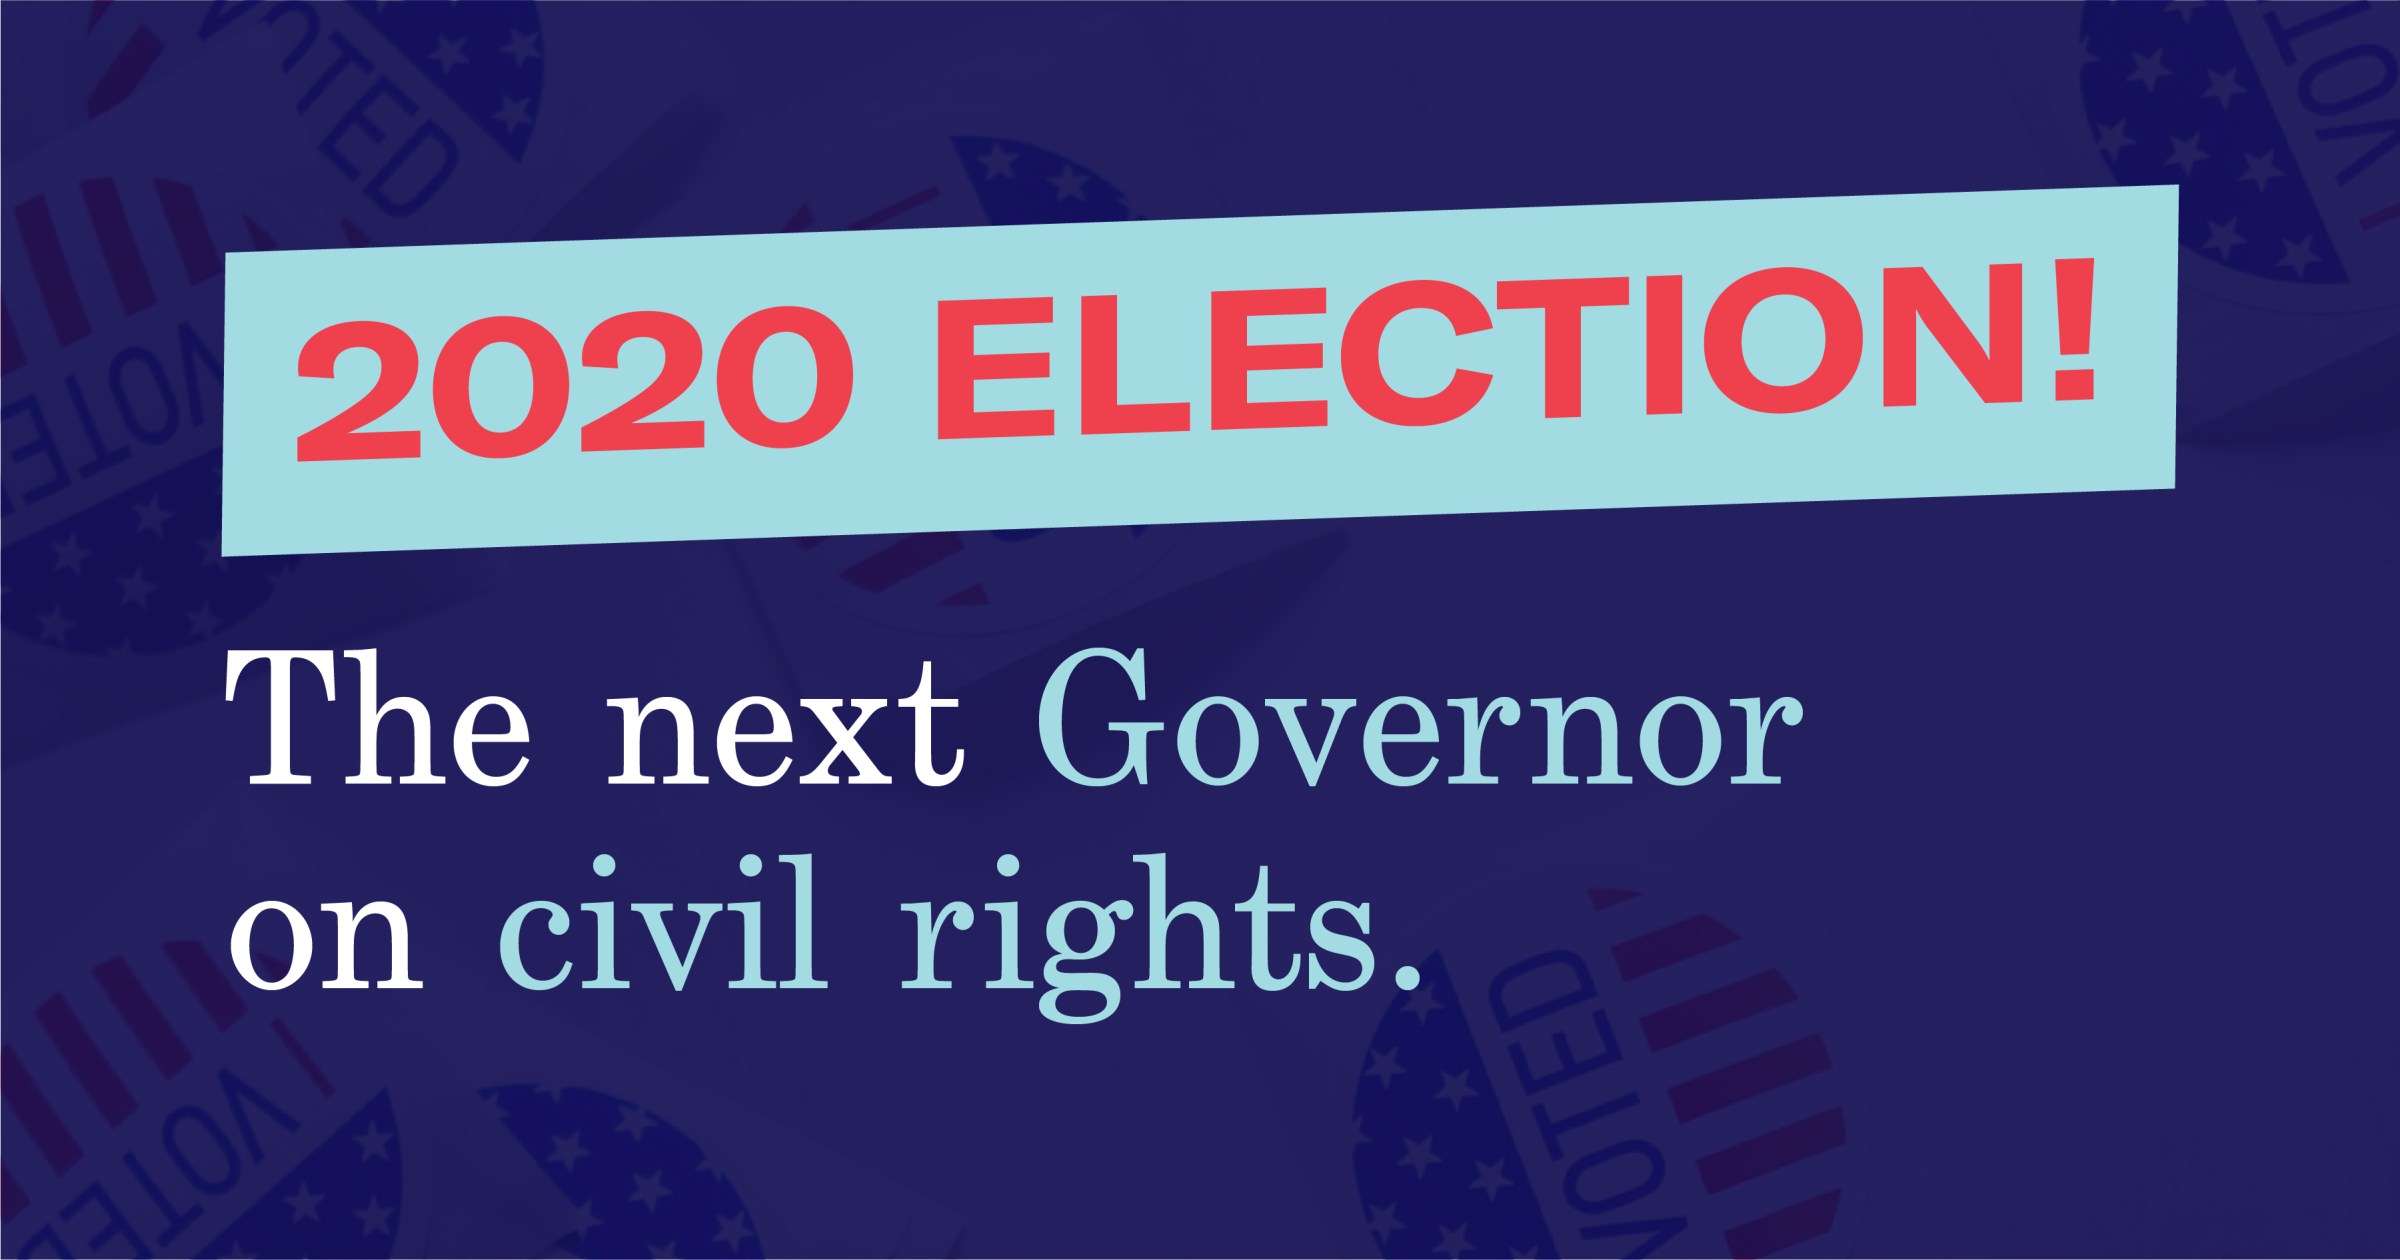 Graphic 2020 Election the next Governor on civil rights